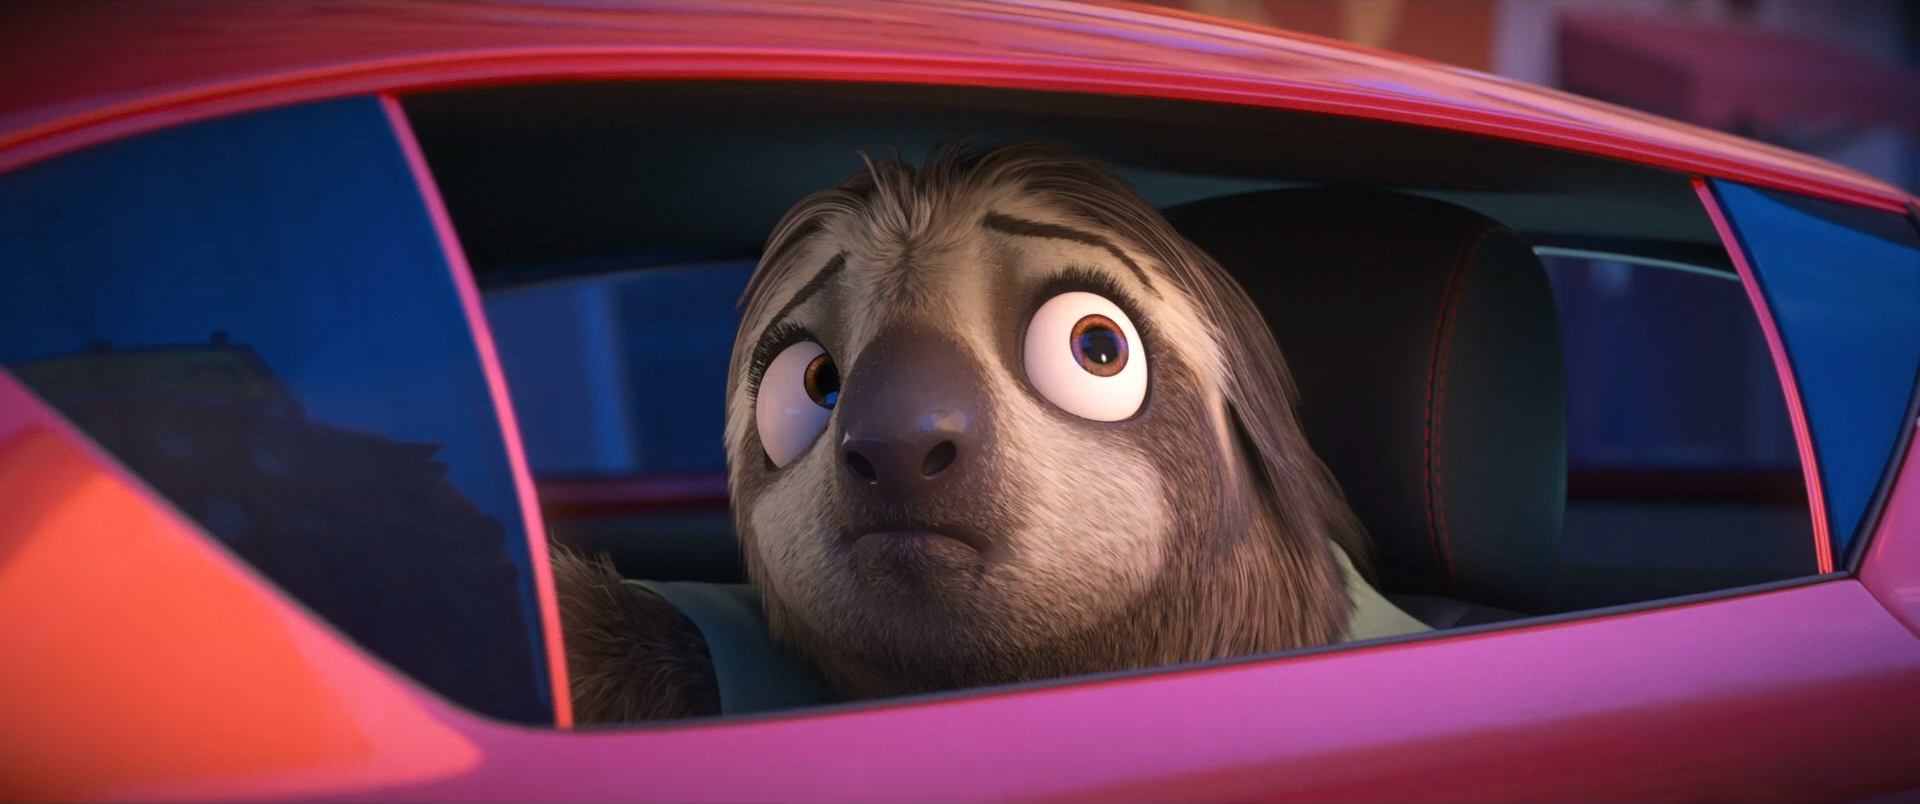 Zootopia_Flash_car.png